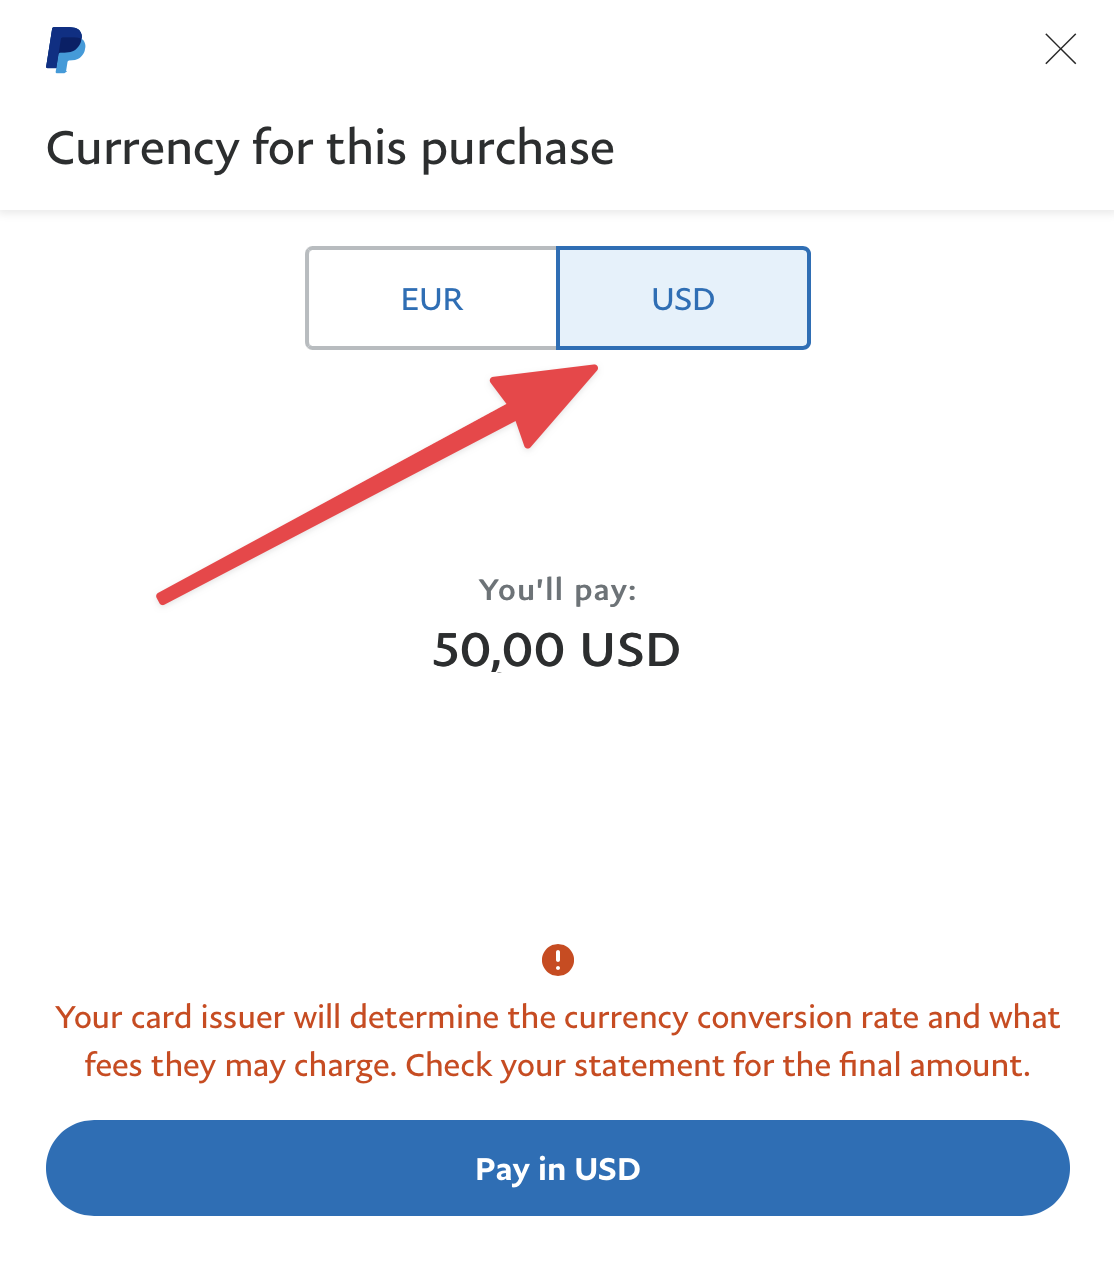 PayPal currency exchange rate - Exiap